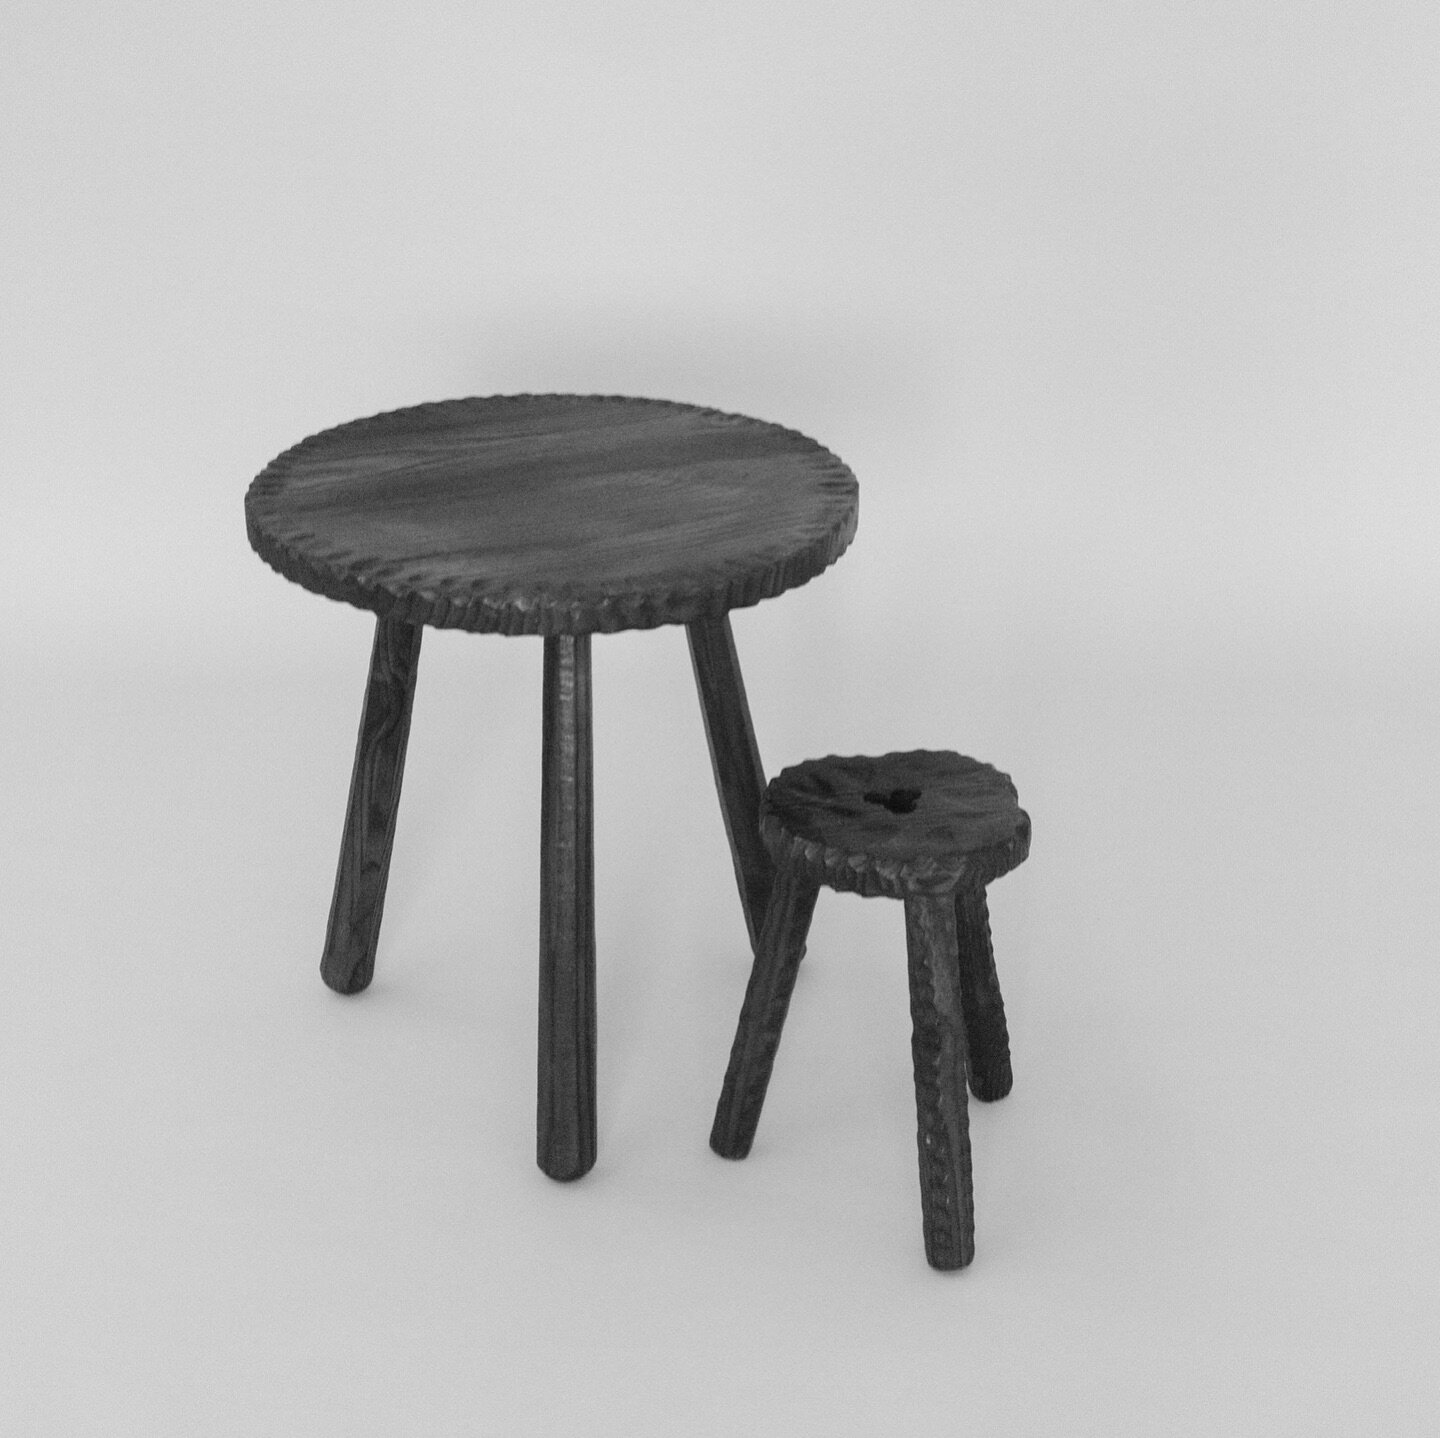 BRUTALIST |  Spanish Side Table and Milking Stool.
.
.
Spain, Brutalist, 1970s
Finish: Hand Carved Stained Oak
Dimensions: L: H58 cm x W54 cm x D54 cm / S:  H39CM x W29cm x D29cm
Qty: 2 (Table/Stool)
.
.
.
.
.

#vintagefurniture #vintage #interiordes